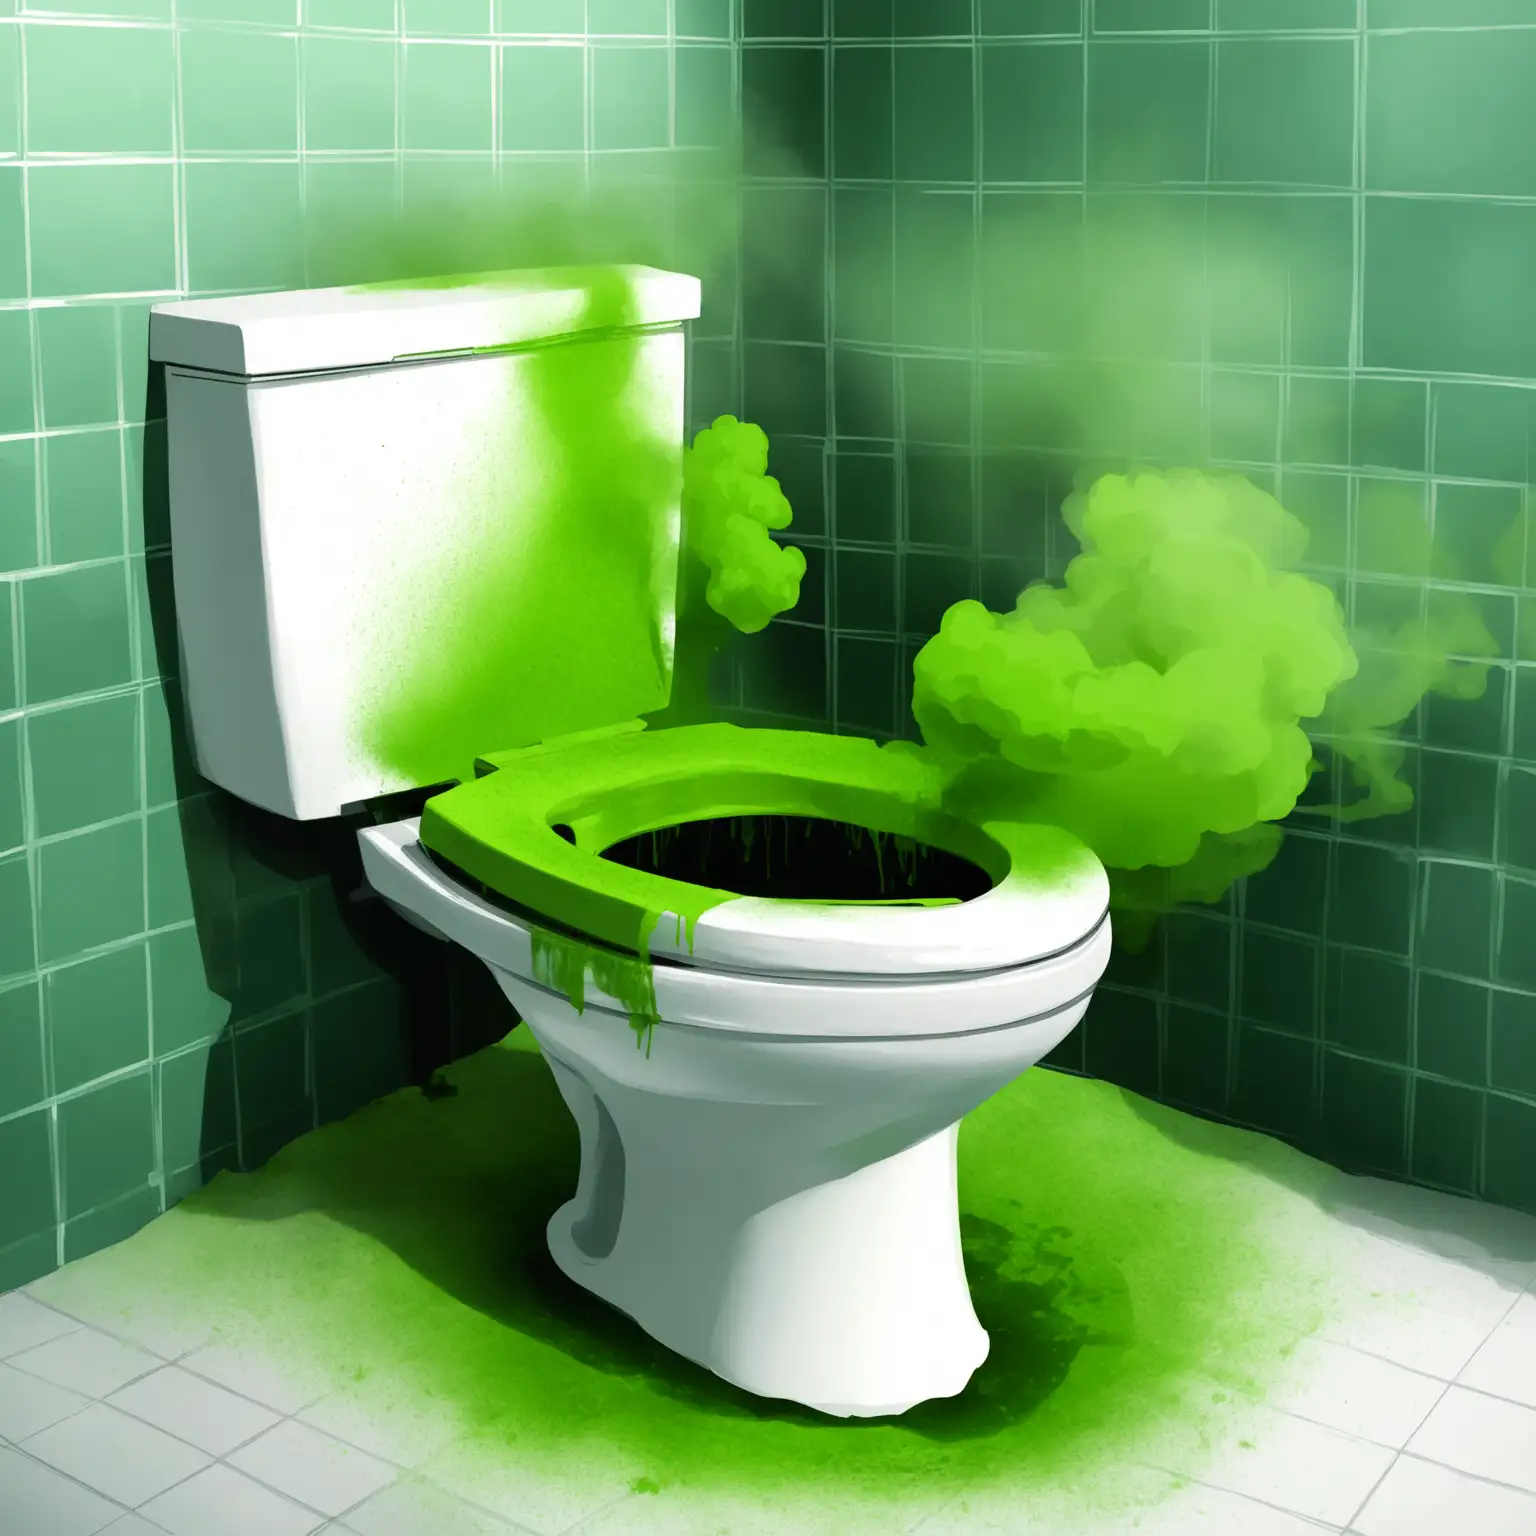 stinky toilet with green fumes smellnn